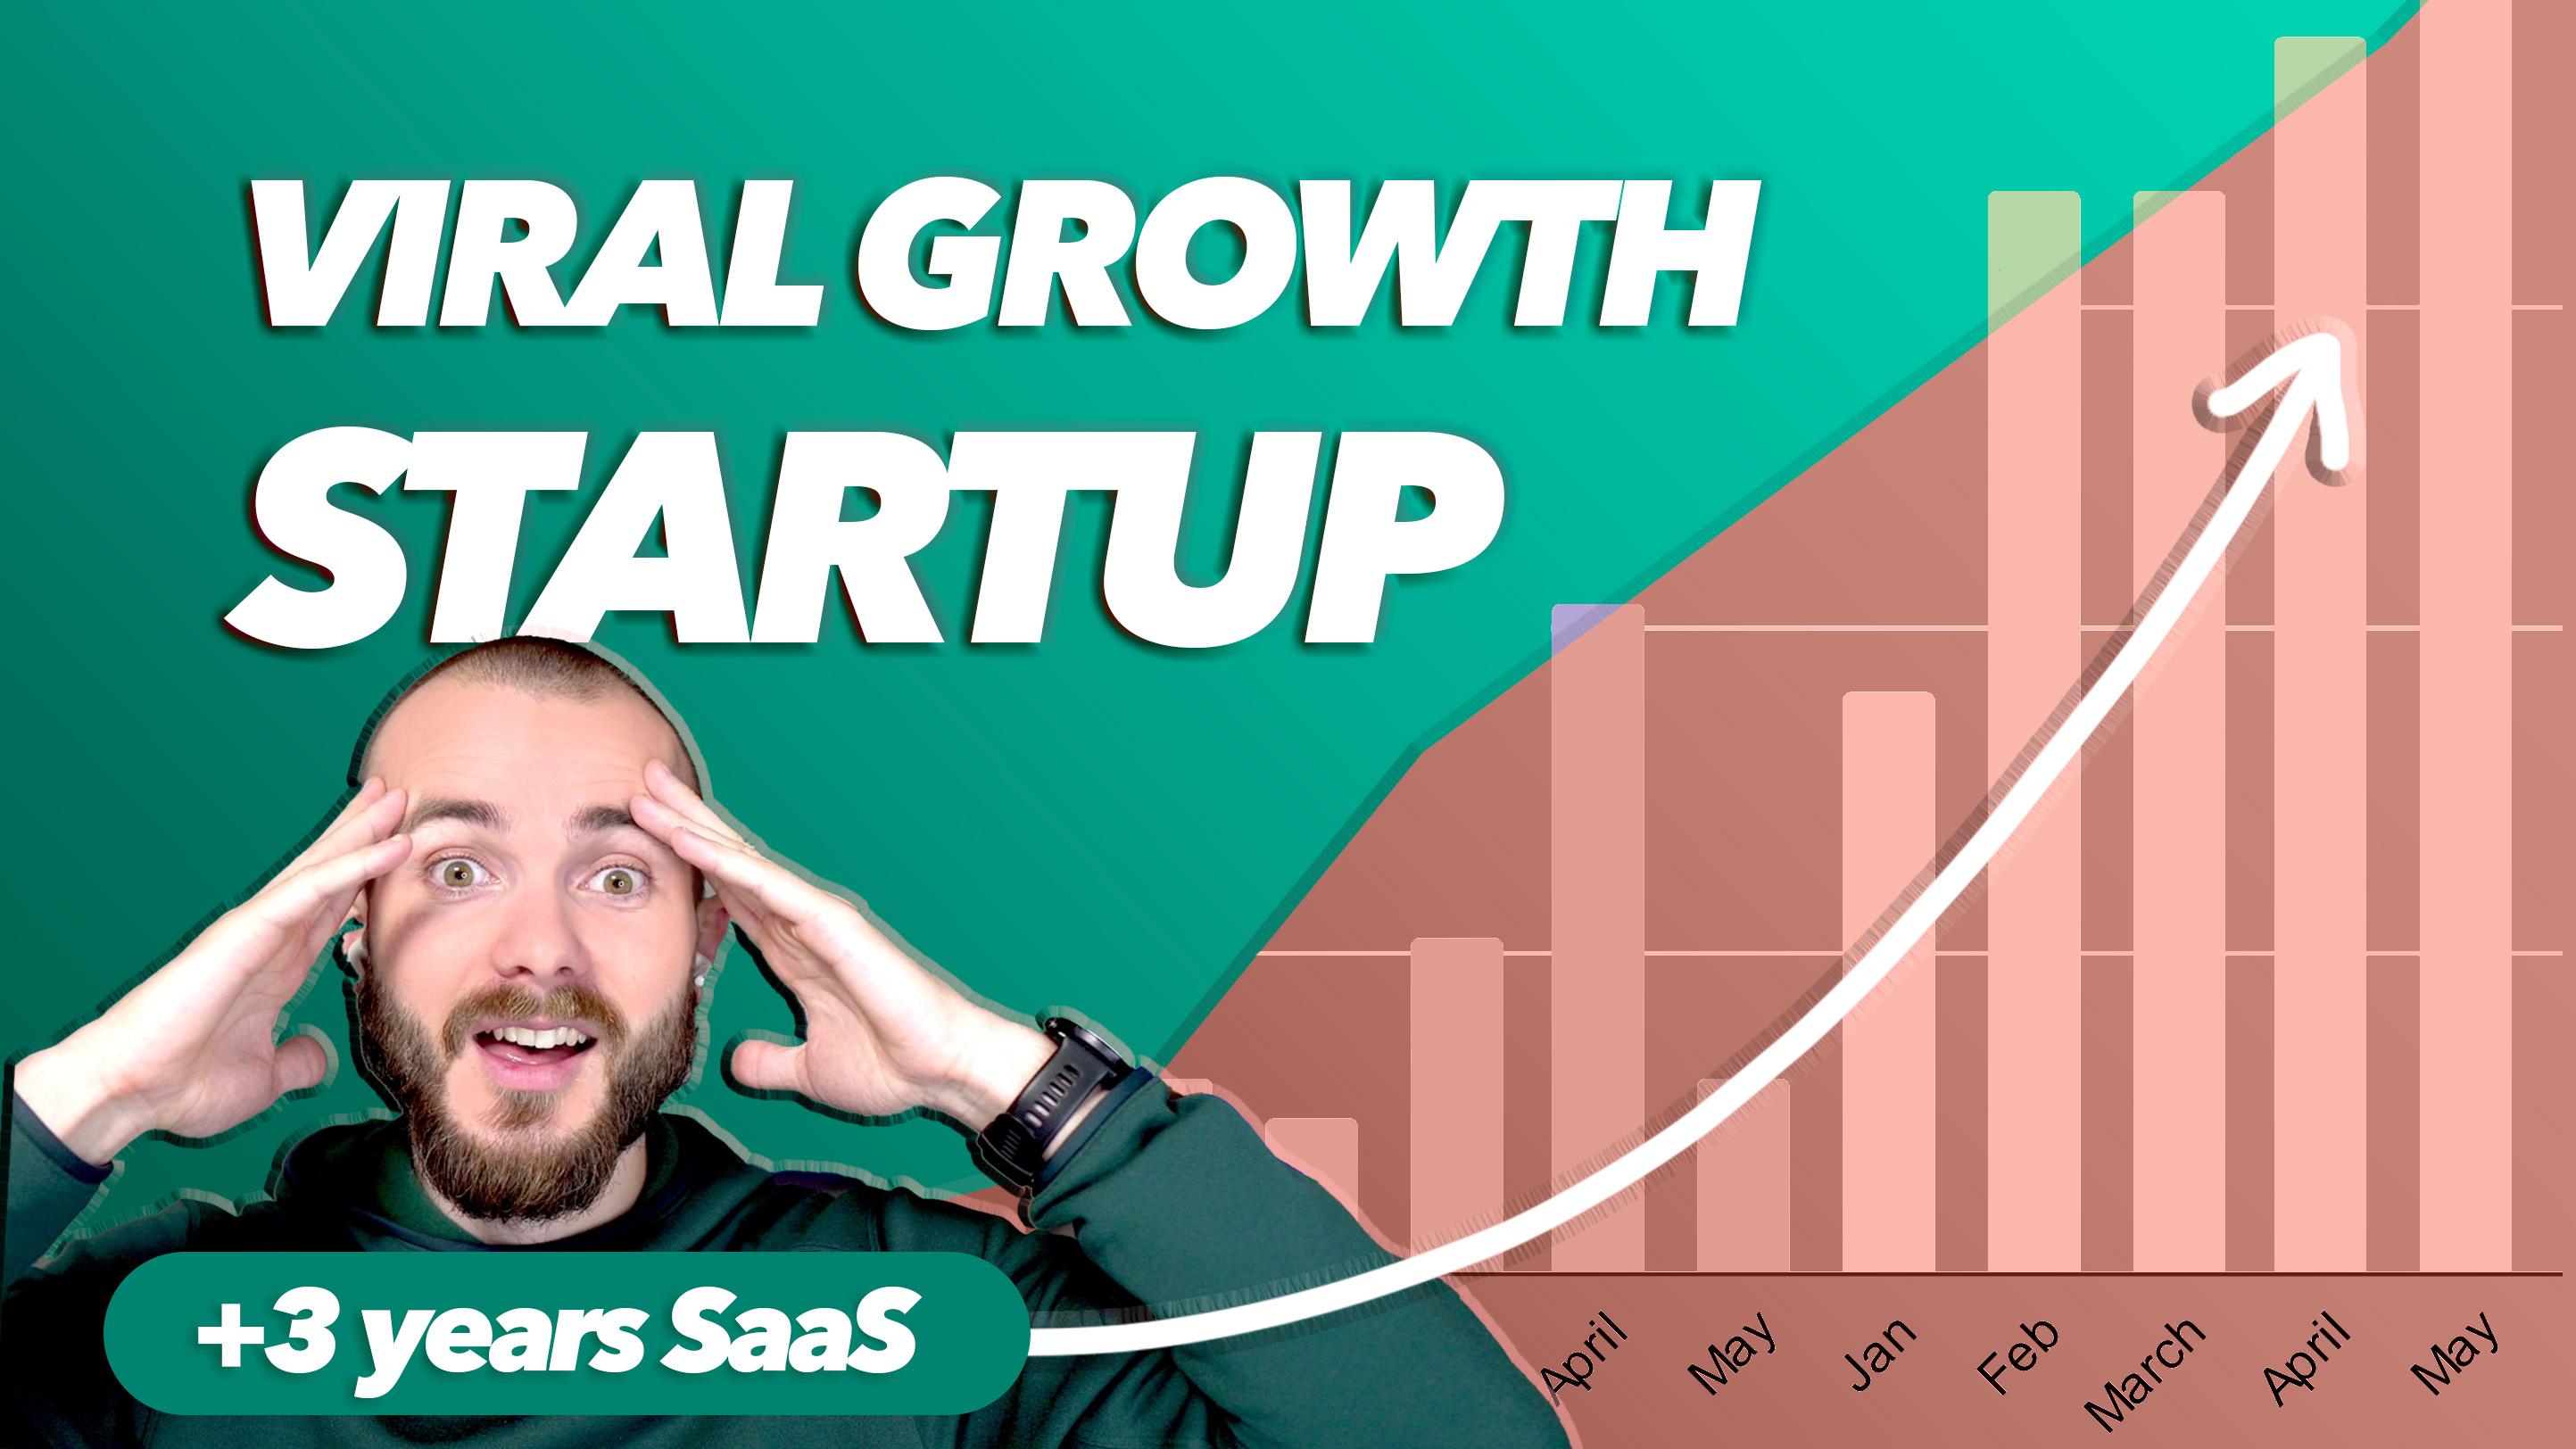 Viral growth: +3 Years of growing a SaaS with network effects